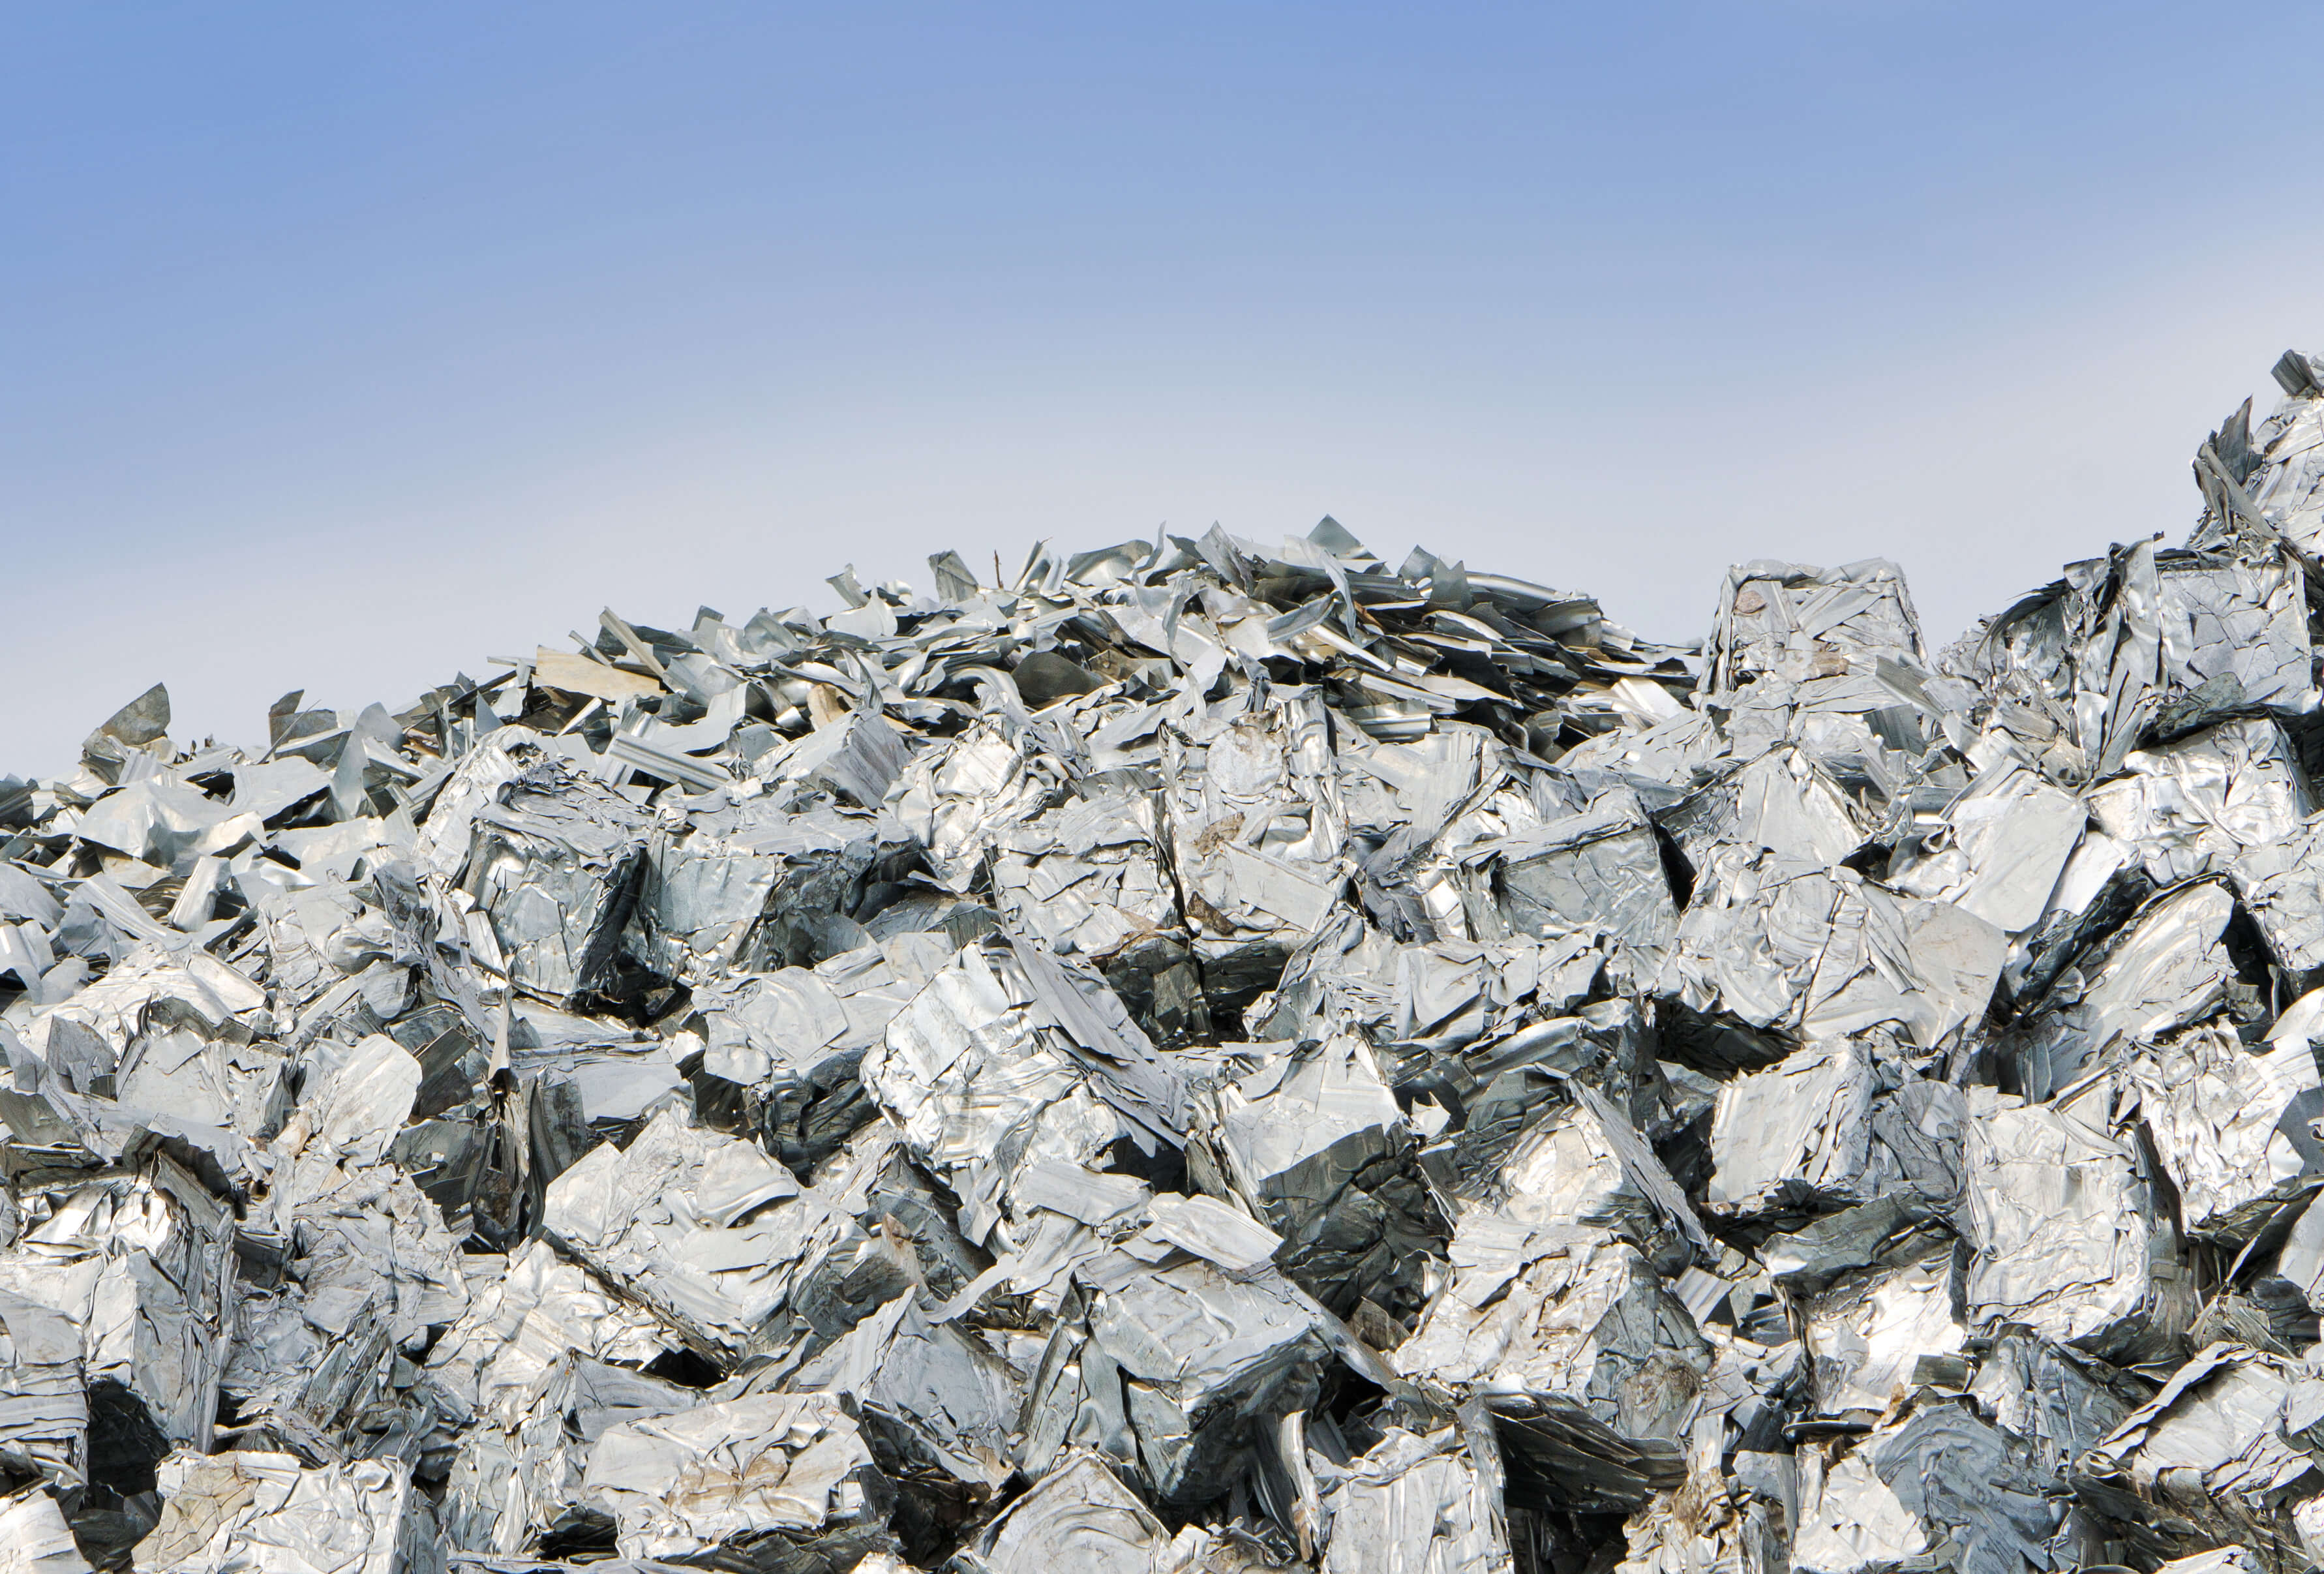 Raw metals in a big silver pile for processing.